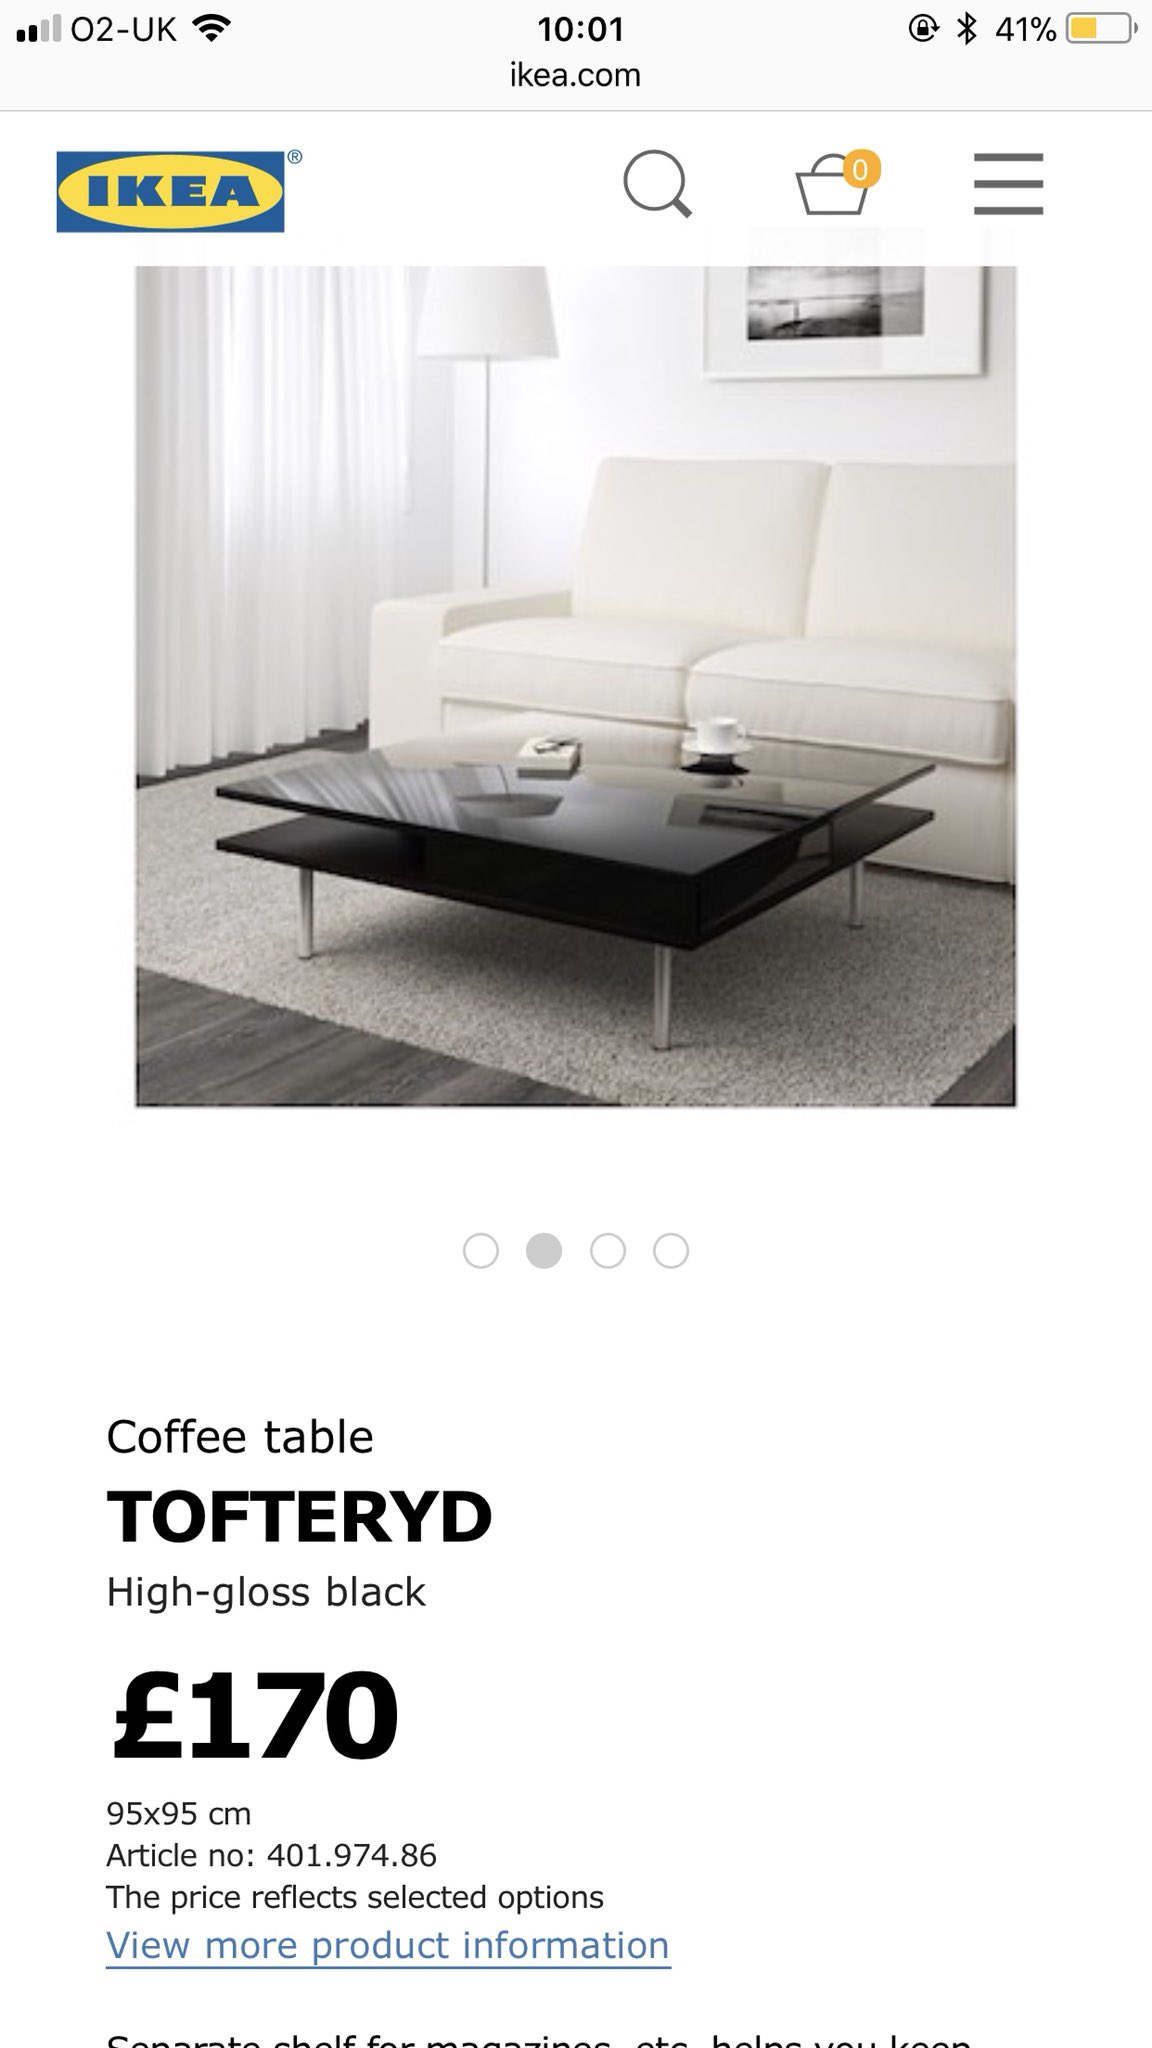 Ezel Ontstaan Goodwill Lilly Ellen on Twitter: "FOR SALE ‼️ IKEA Coffee table TOFTERYD High-gloss  black ORIGINALLY £170! need gone by 20th April OFFERS PLEASE Assembled size  Length: 95 cm Width: 95 cm Height: 31